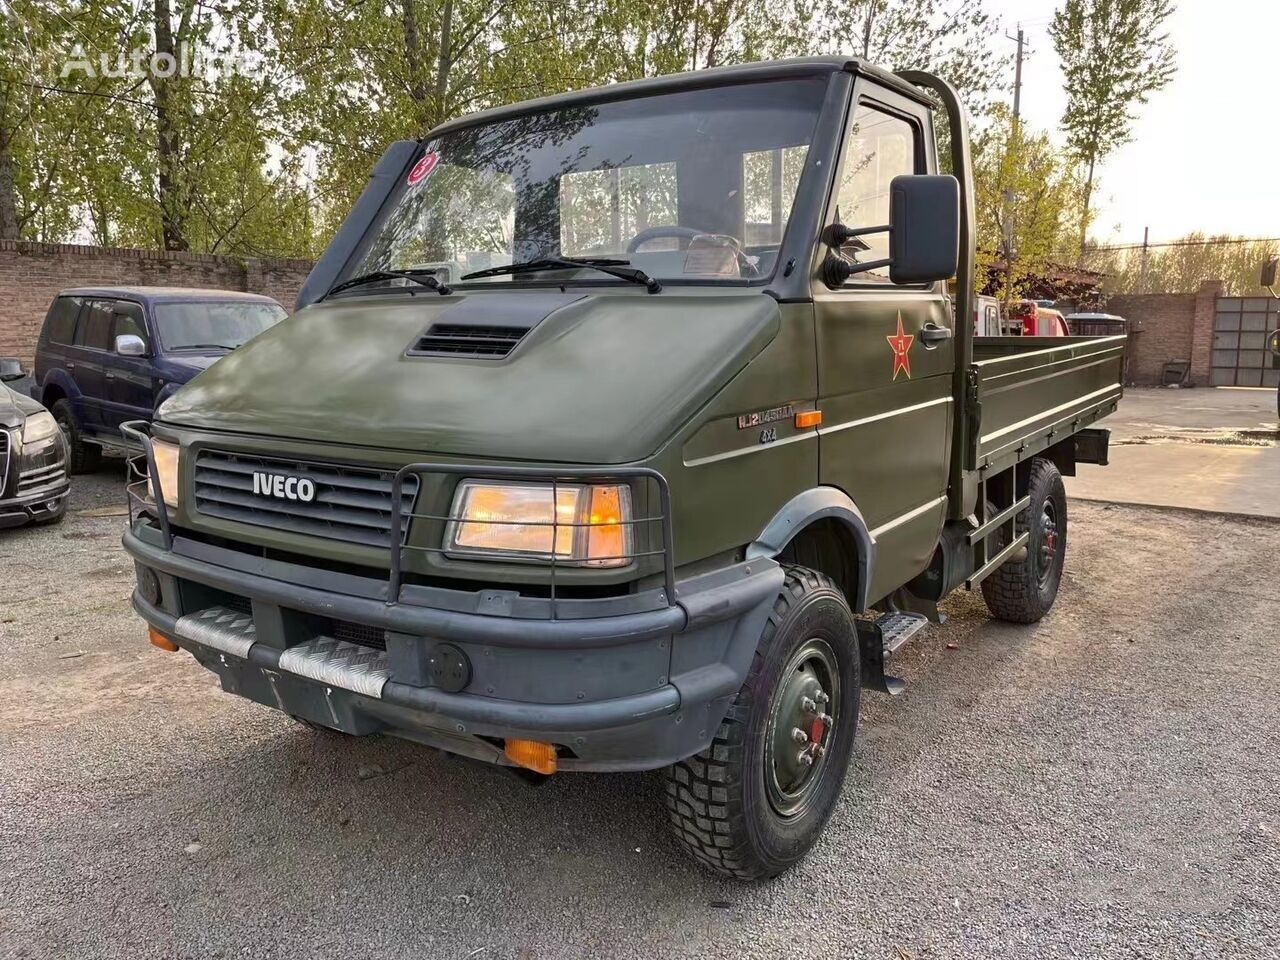 Fourgon plateau IVECO 4x4 all wheels drive light cargo truck military chassis: photos 2